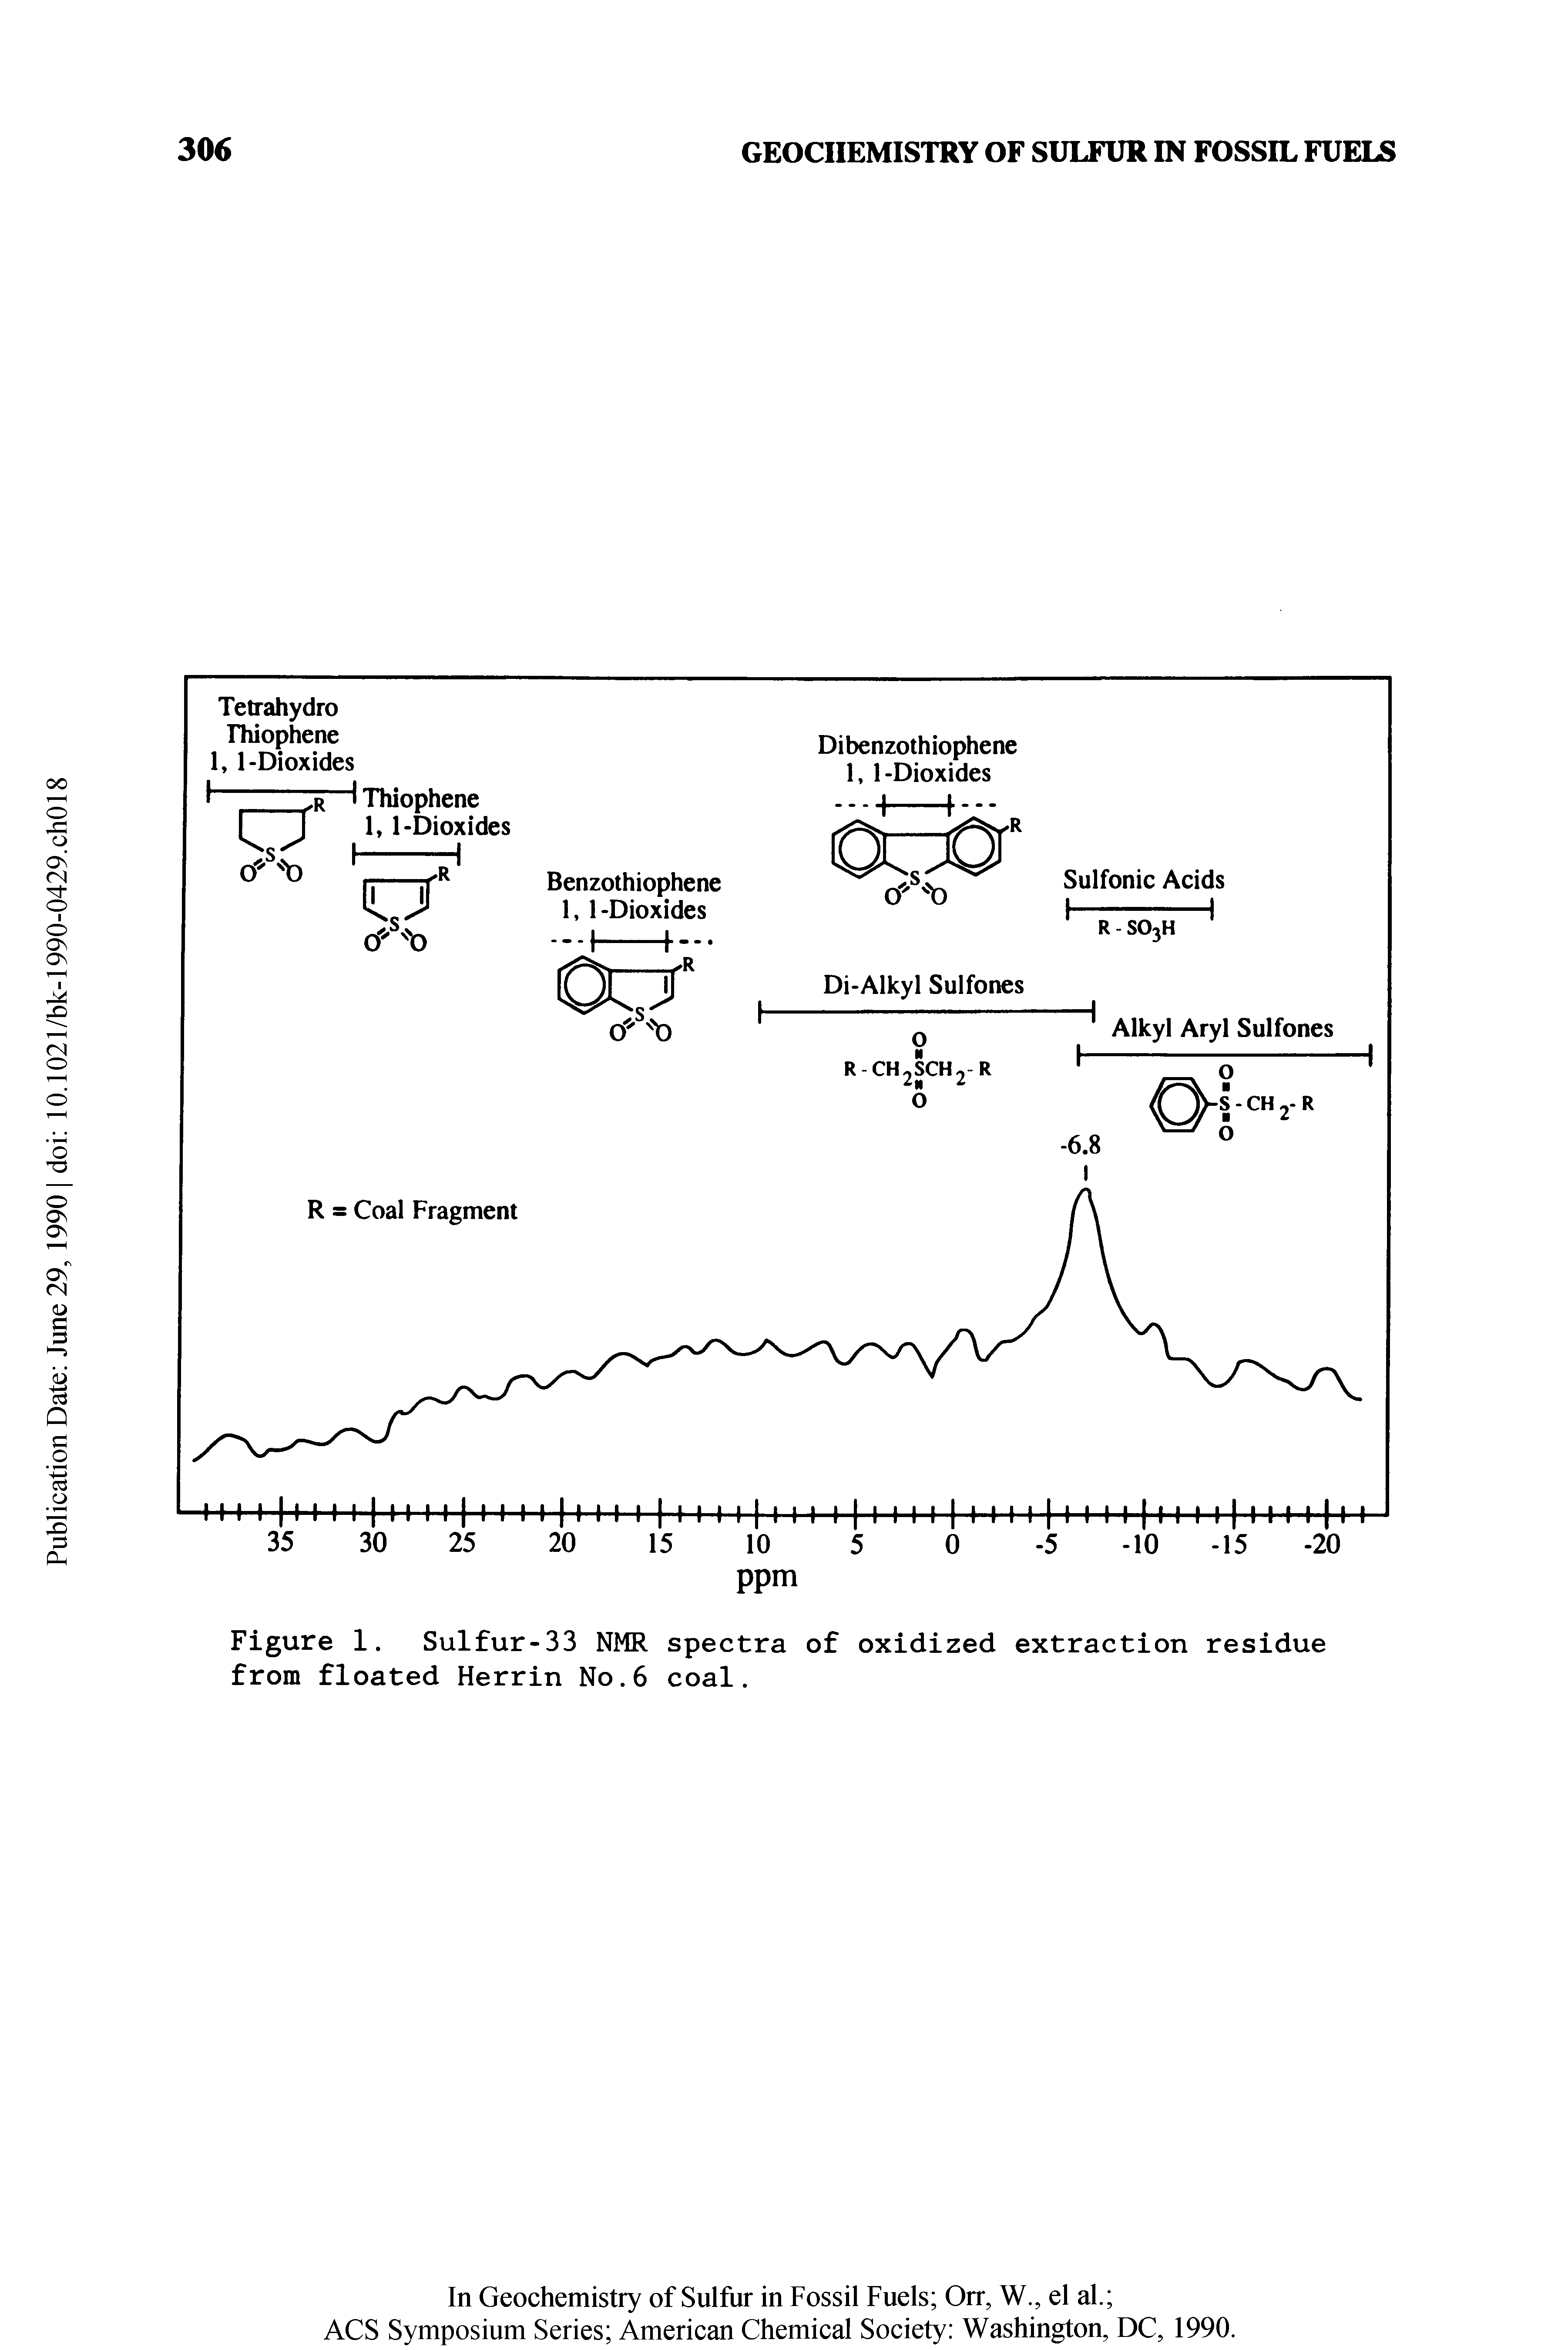 Figure 1. Sulfur-33 NMR spectra of oxidized extraction residue from floated Herrin No.6 coal.